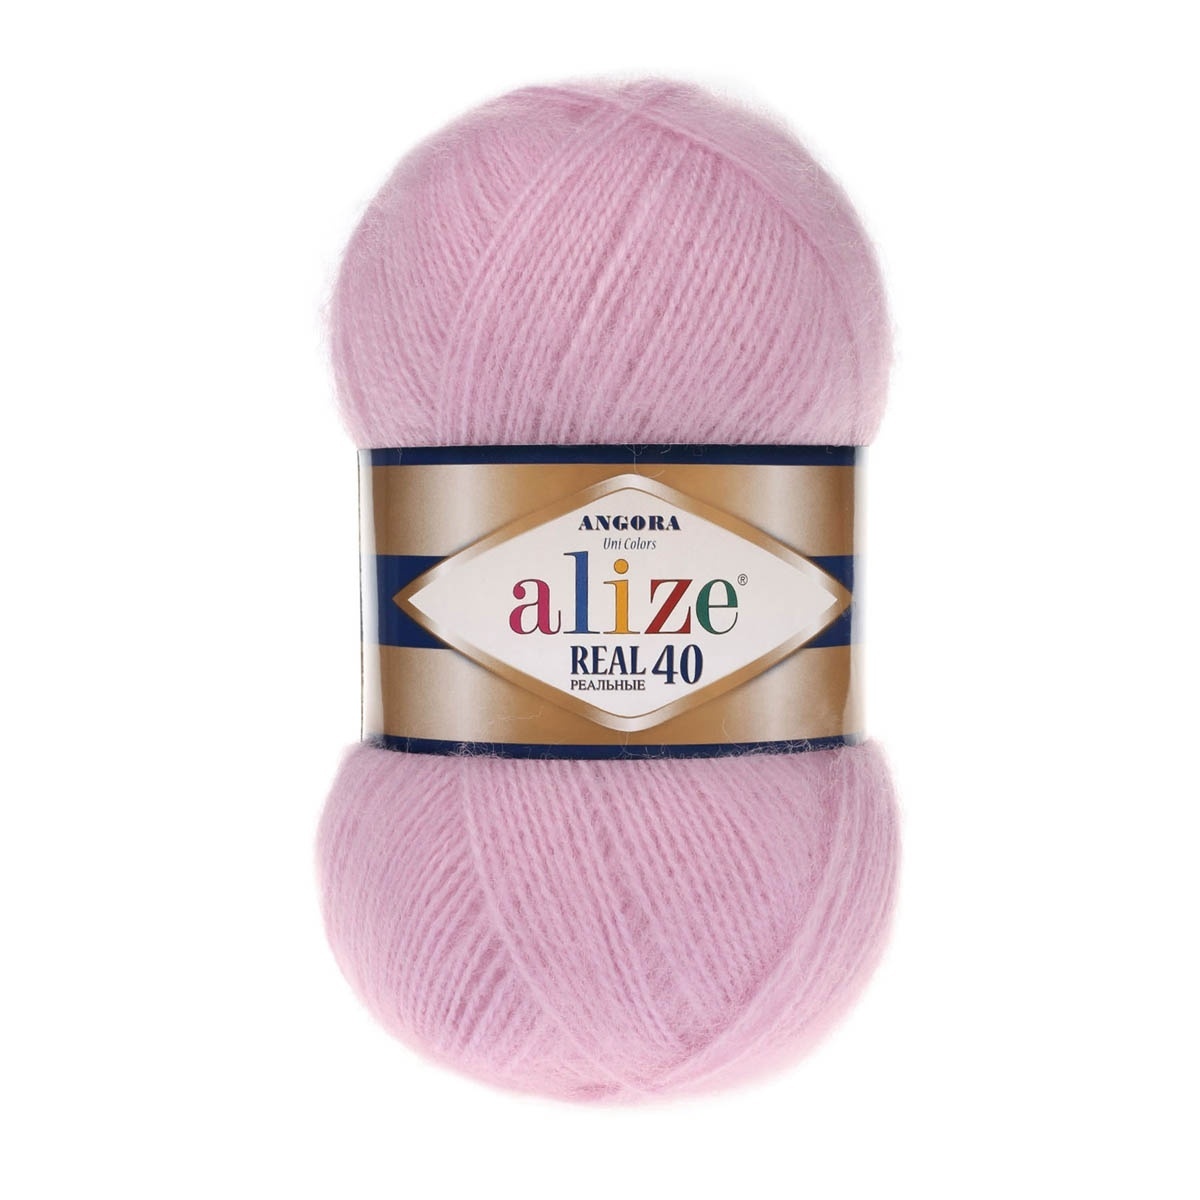 Alize Angora Real 40, 40% Wool, 60% Acrylic 5 Skein Value Pack, 500g фото 1